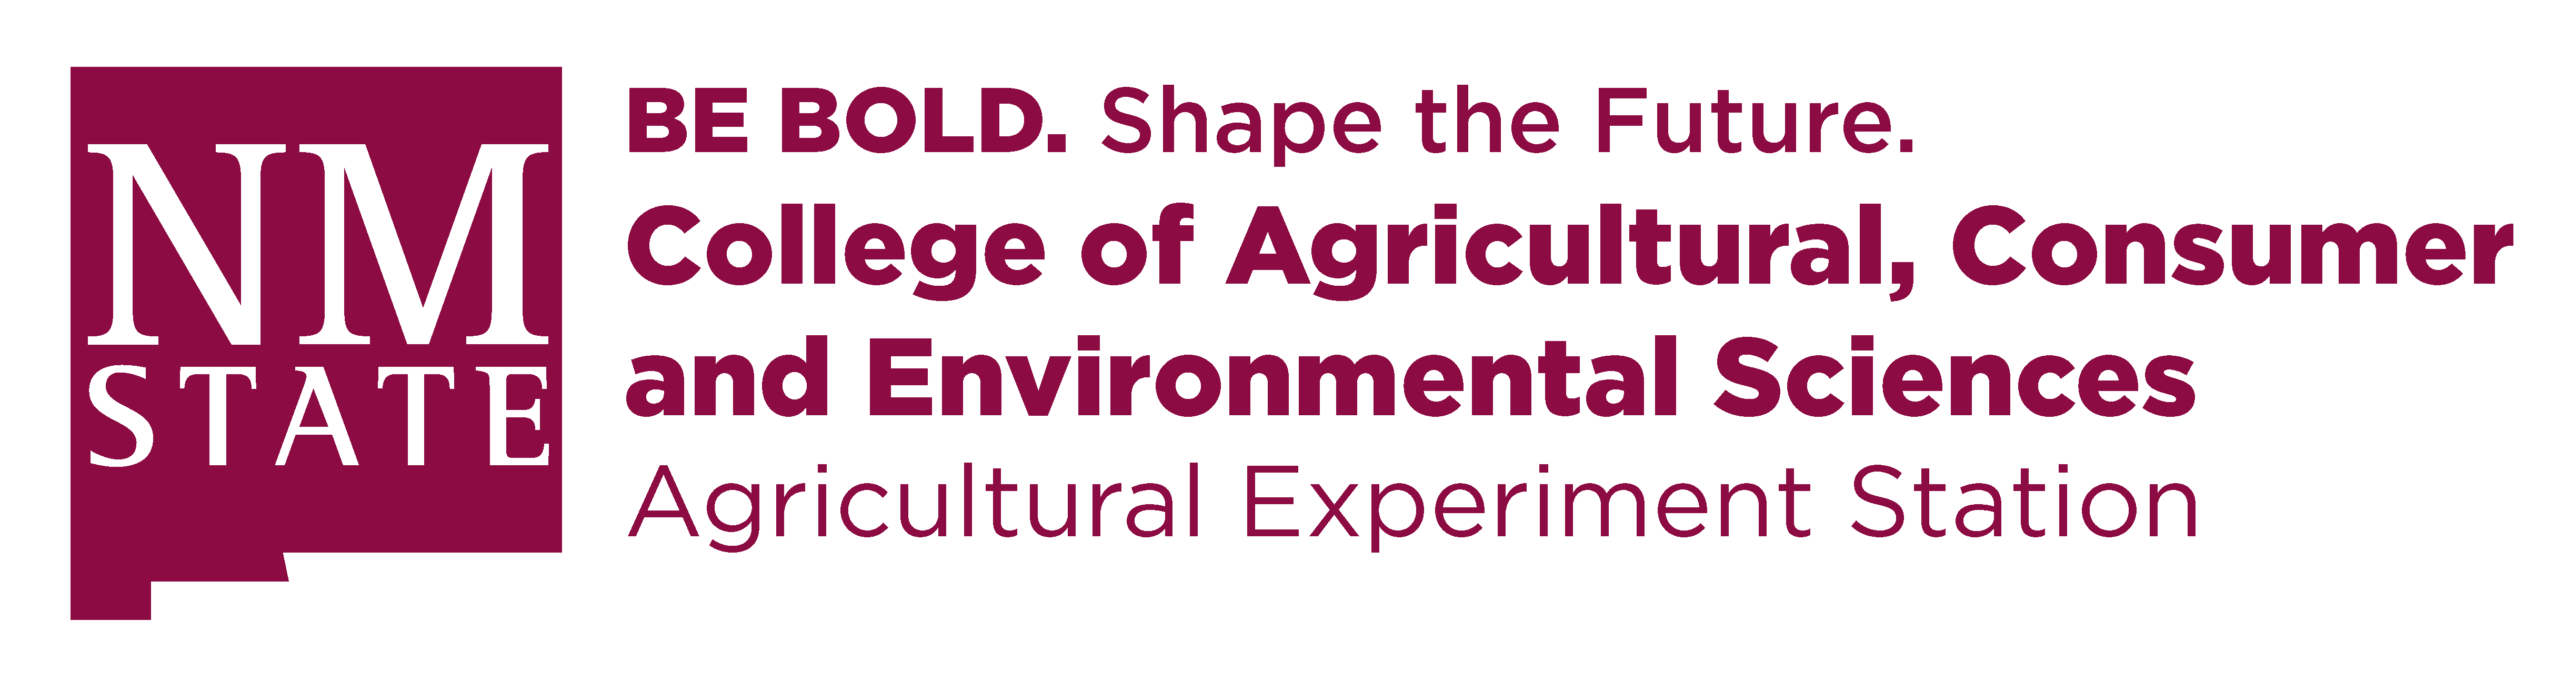 Logo: New Mexico State University - All About Discovery! (trademark) - College of Agricultural, Consumer and Environmental Sciences - Cooperative Extension Service